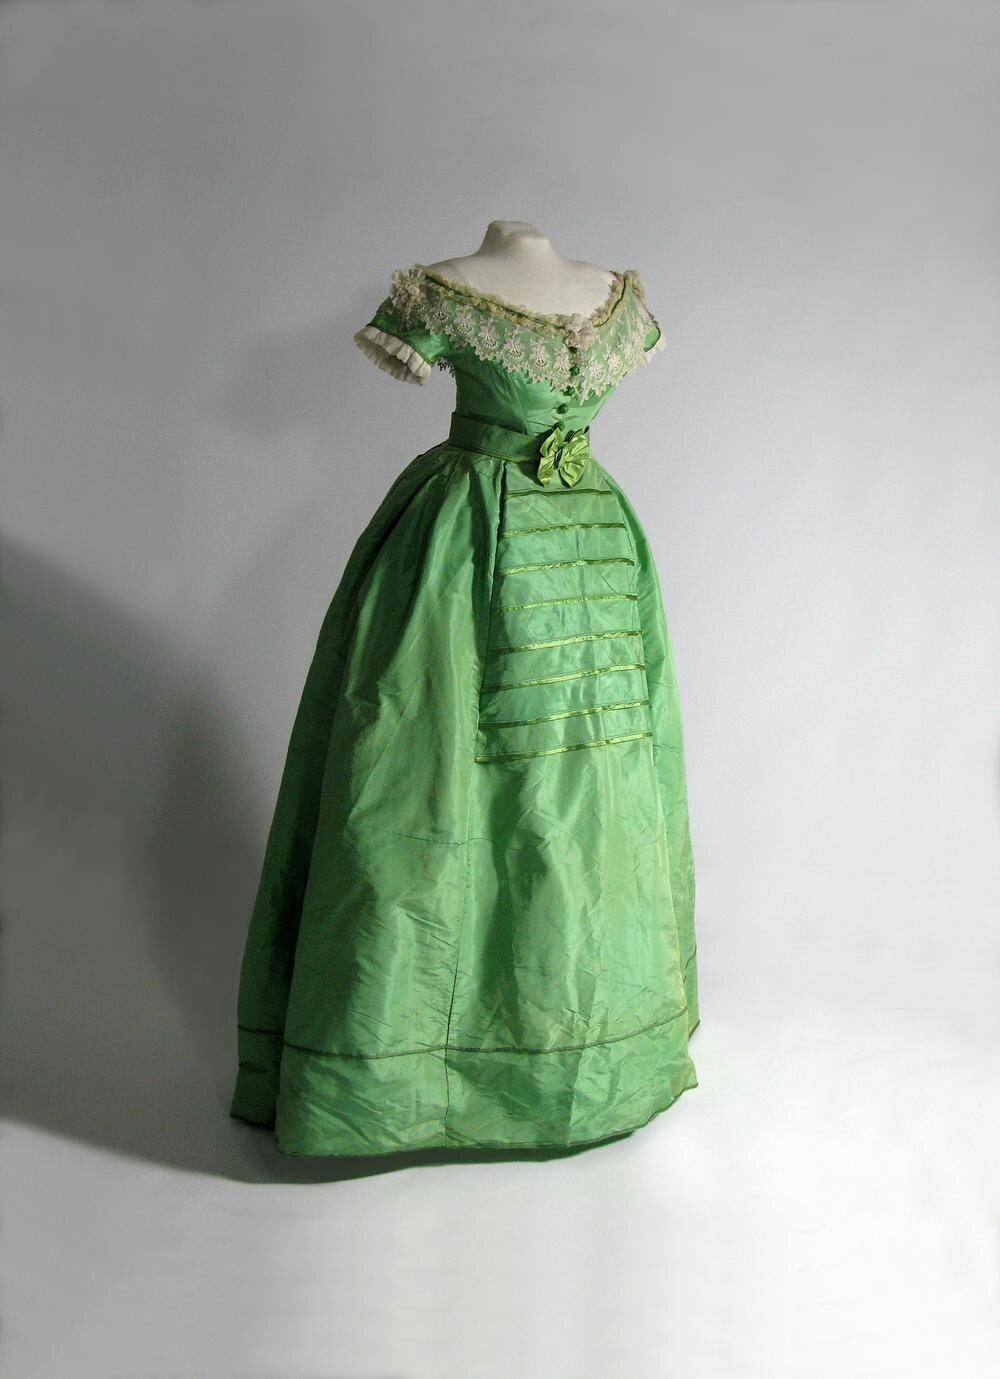 The first color-fast green arsenic dye is present in many items in the Bata Shoe Museum exhibit, including this 1860s ball gown. Bata Shoe Museum/Arnold Matthews